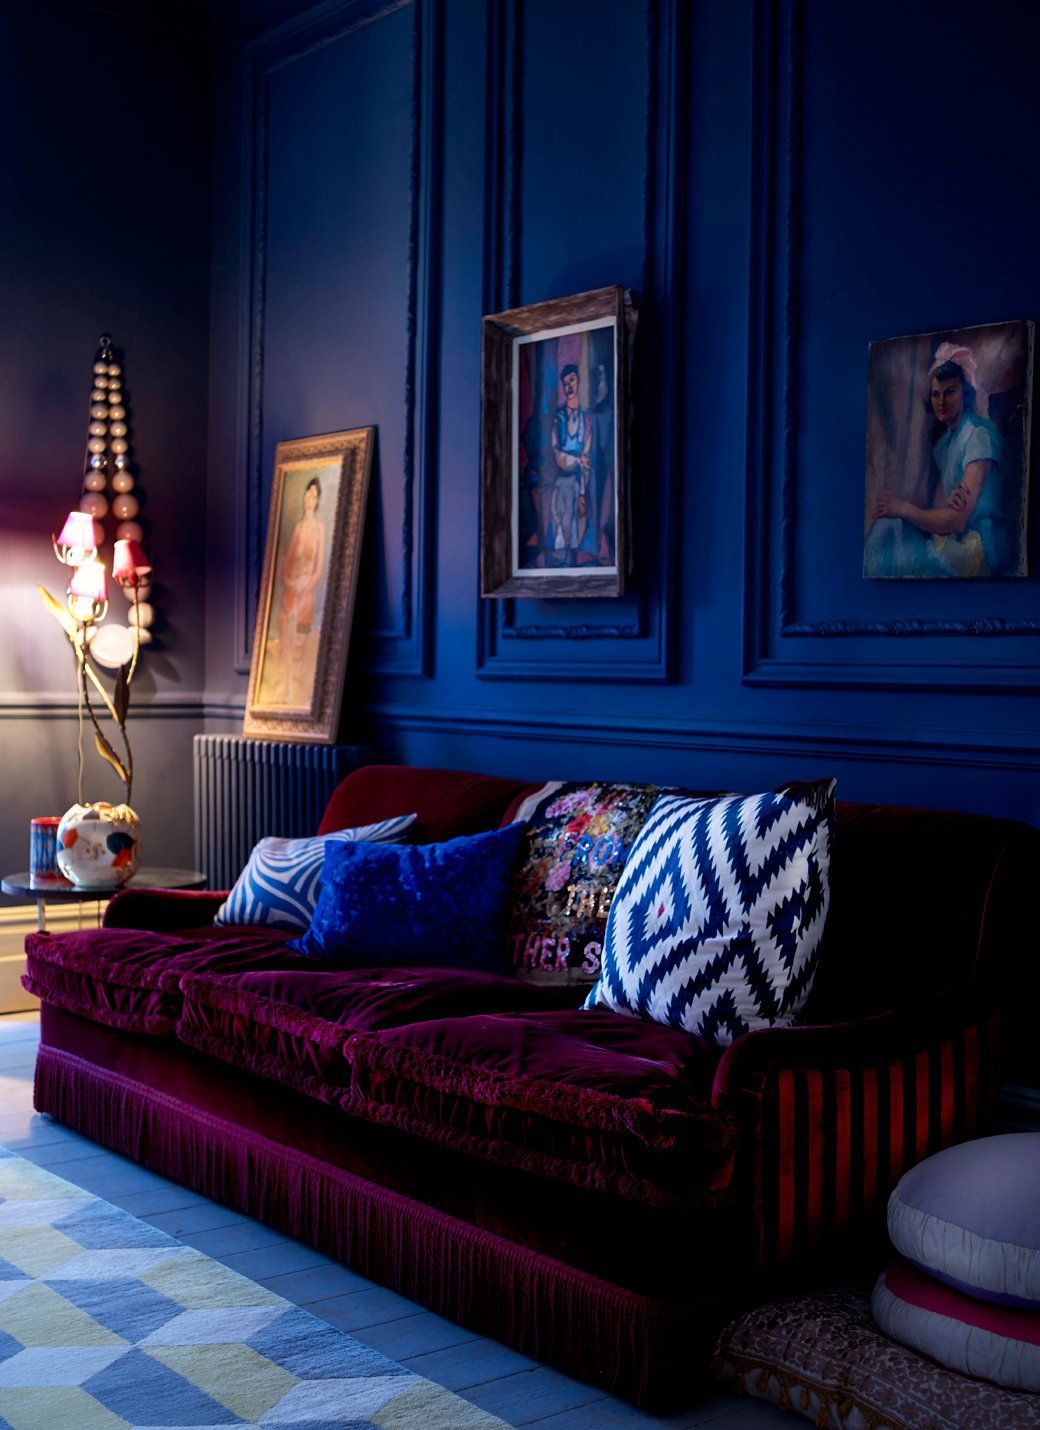 LOVE, LOVE, LOVE the textures and detail on the couch! velvet, brush fringe and long fringe or ruching